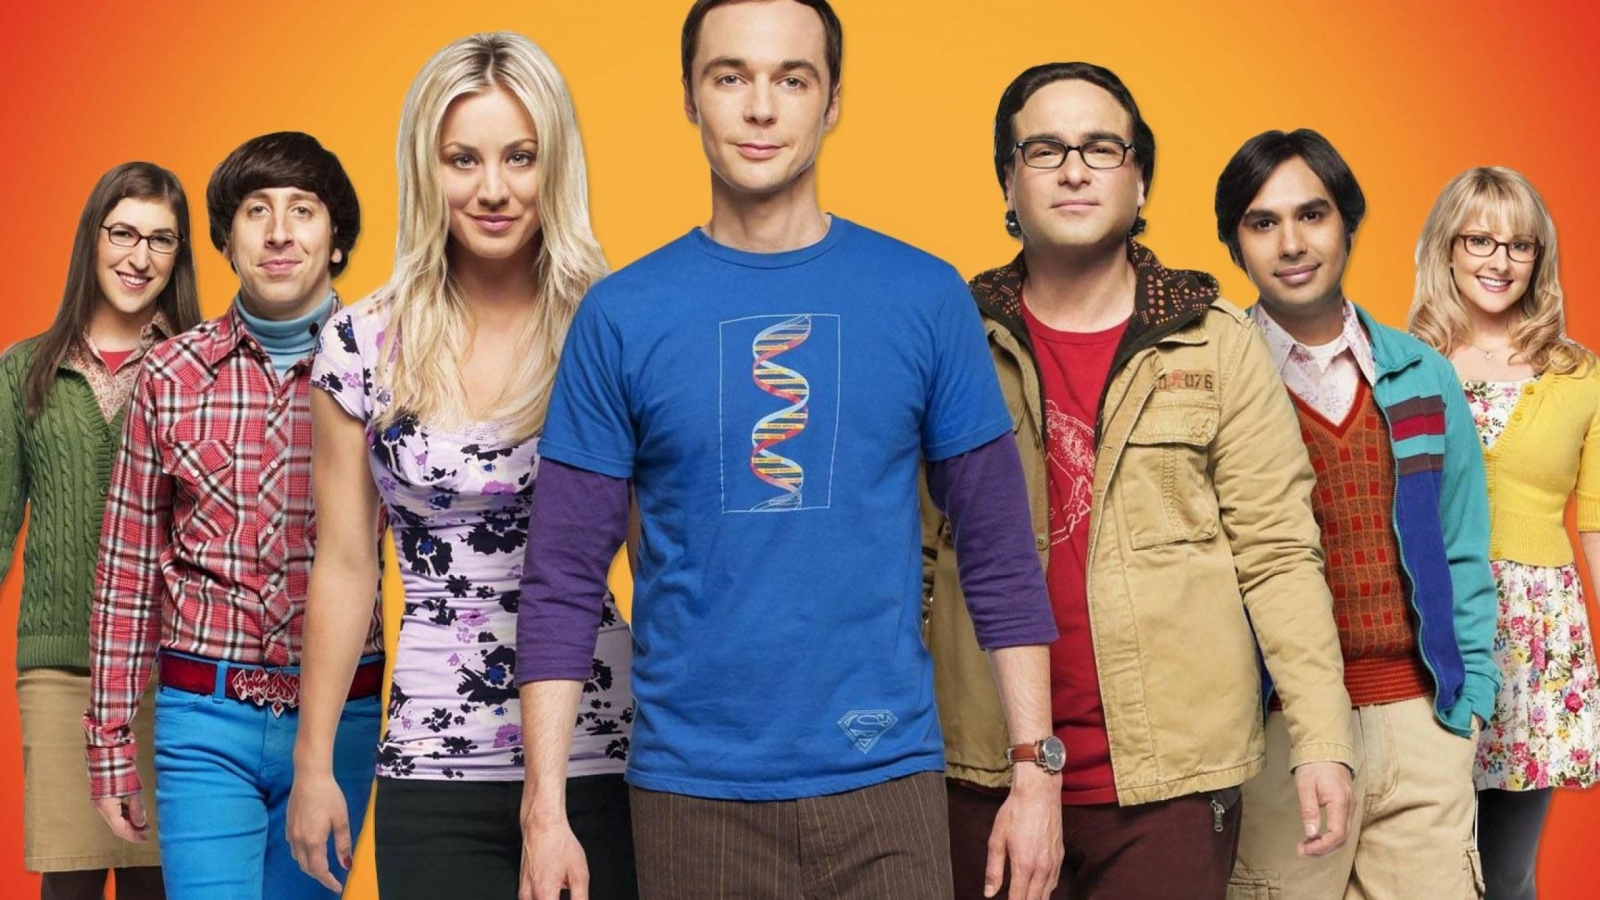 The Big Bang Theory Smiley Cast for 1600 x 900 HDTV resolution